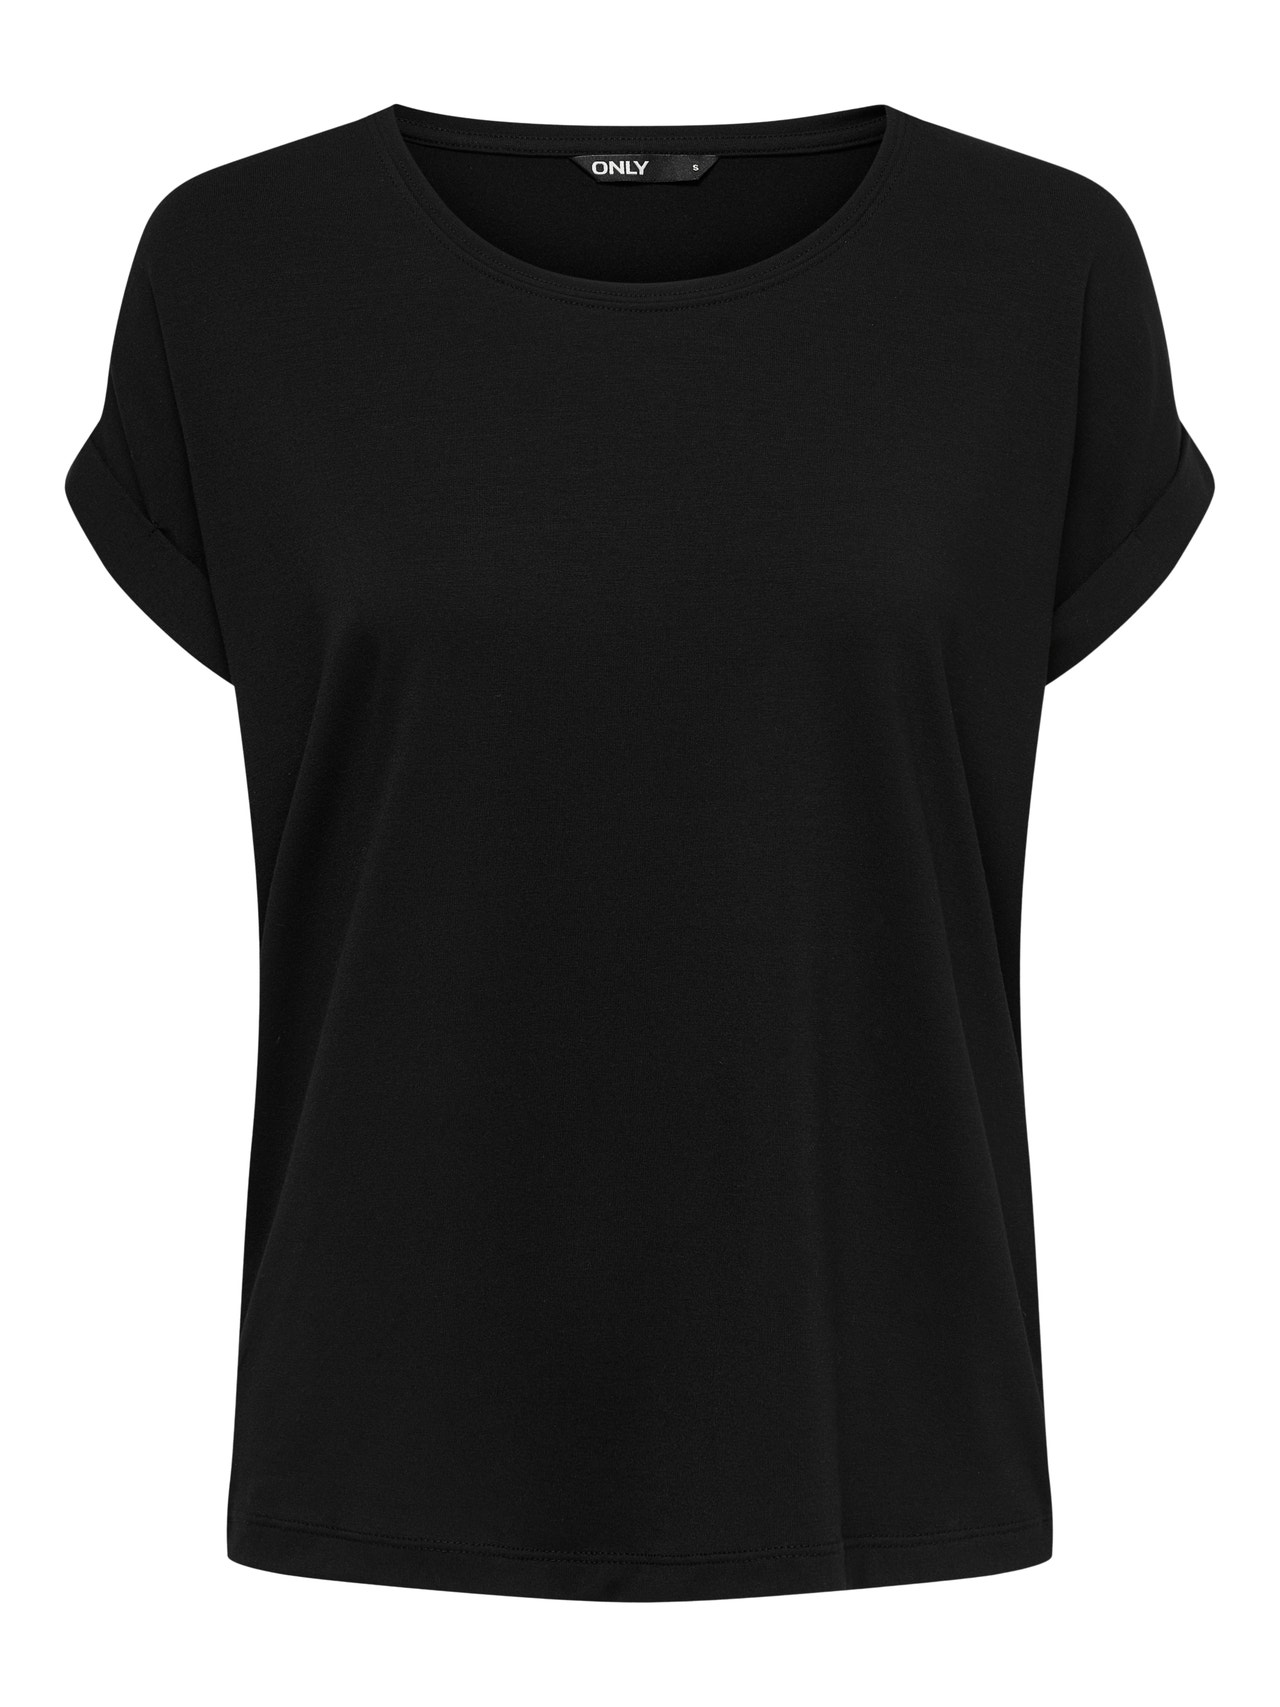 ONLY Loose fit T-shirt -Black - 15106662